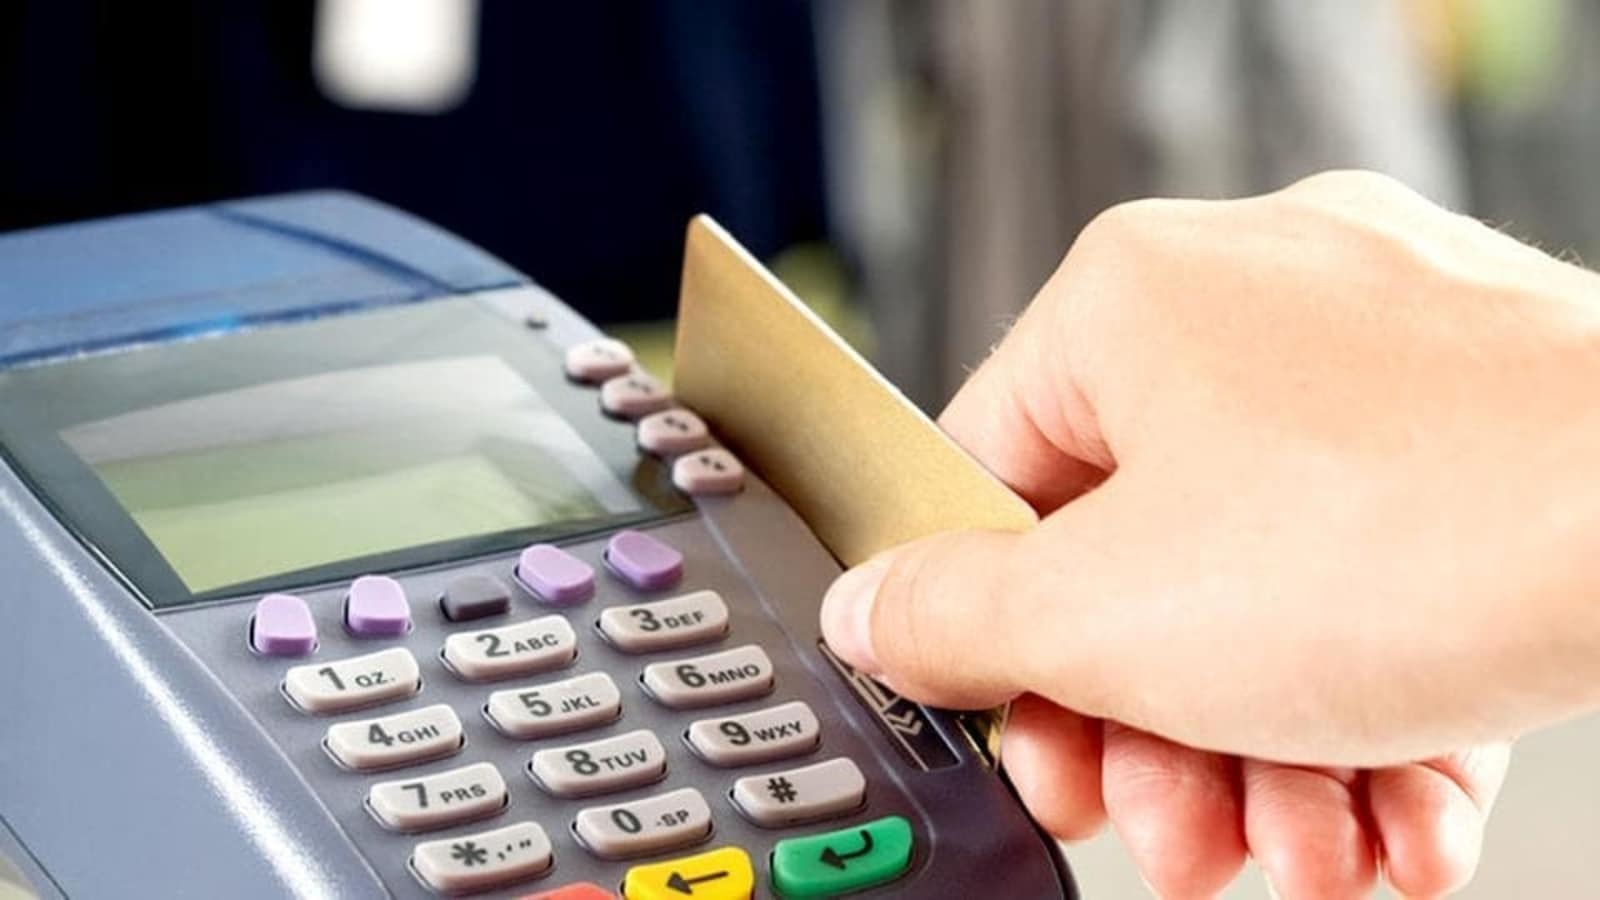 RBI new rules on issue of credit cards, debit cards: All you need to know